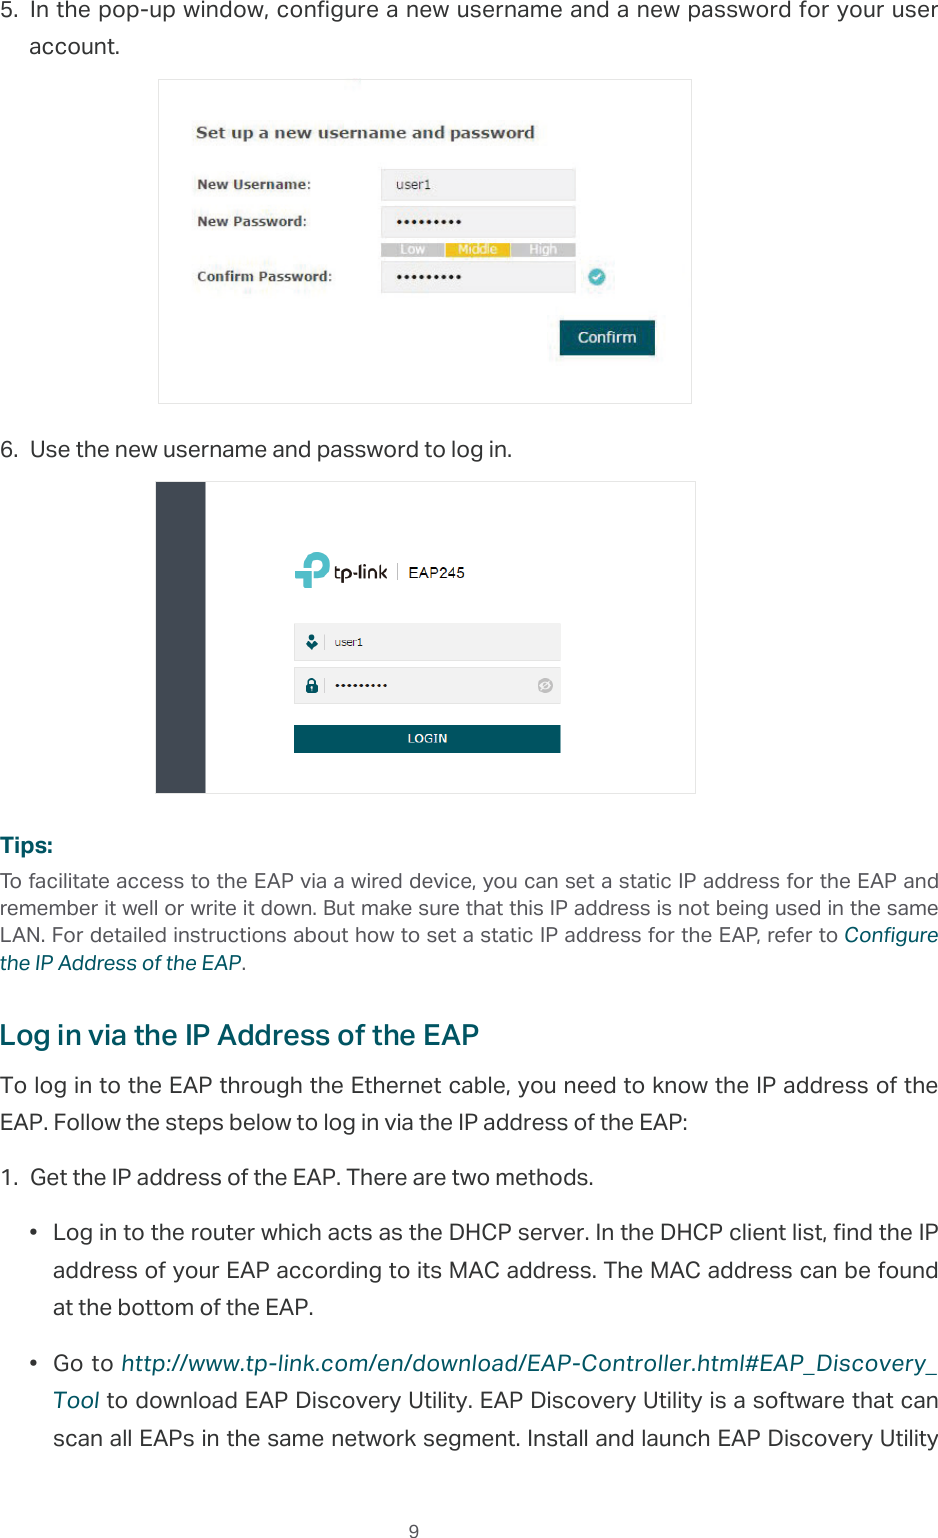  95. In the pop-up window, configure a new username and a new password for your user account.6. Use the new username and password to log in.Tips:To facilitate access to the EAP via a wired device, you can set a static IP address for the EAP and remember it well or write it down. But make sure that this IP address is not being used in the same LAN. For detailed instructions about how to set a static IP address for the EAP, refer to Configure the IP Address of the EAP.Log in via the IP Address of the EAPTo log in to the EAP through the Ethernet cable, you need to know the IP address of the EAP. Follow the steps below to log in via the IP address of the EAP:1. Get the IP address of the EAP. There are two methods.•  Log in to the router which acts as the DHCP server. In the DHCP client list, find the IP address of your EAP according to its MAC address. The MAC address can be found at the bottom of the EAP.•  Go to http://www.tp-link.com/en/download/EAP-Controller.html#EAP_Discovery_Tool to download EAP Discovery Utility. EAP Discovery Utility is a software that can scan all EAPs in the same network segment. Install and launch EAP Discovery Utility 